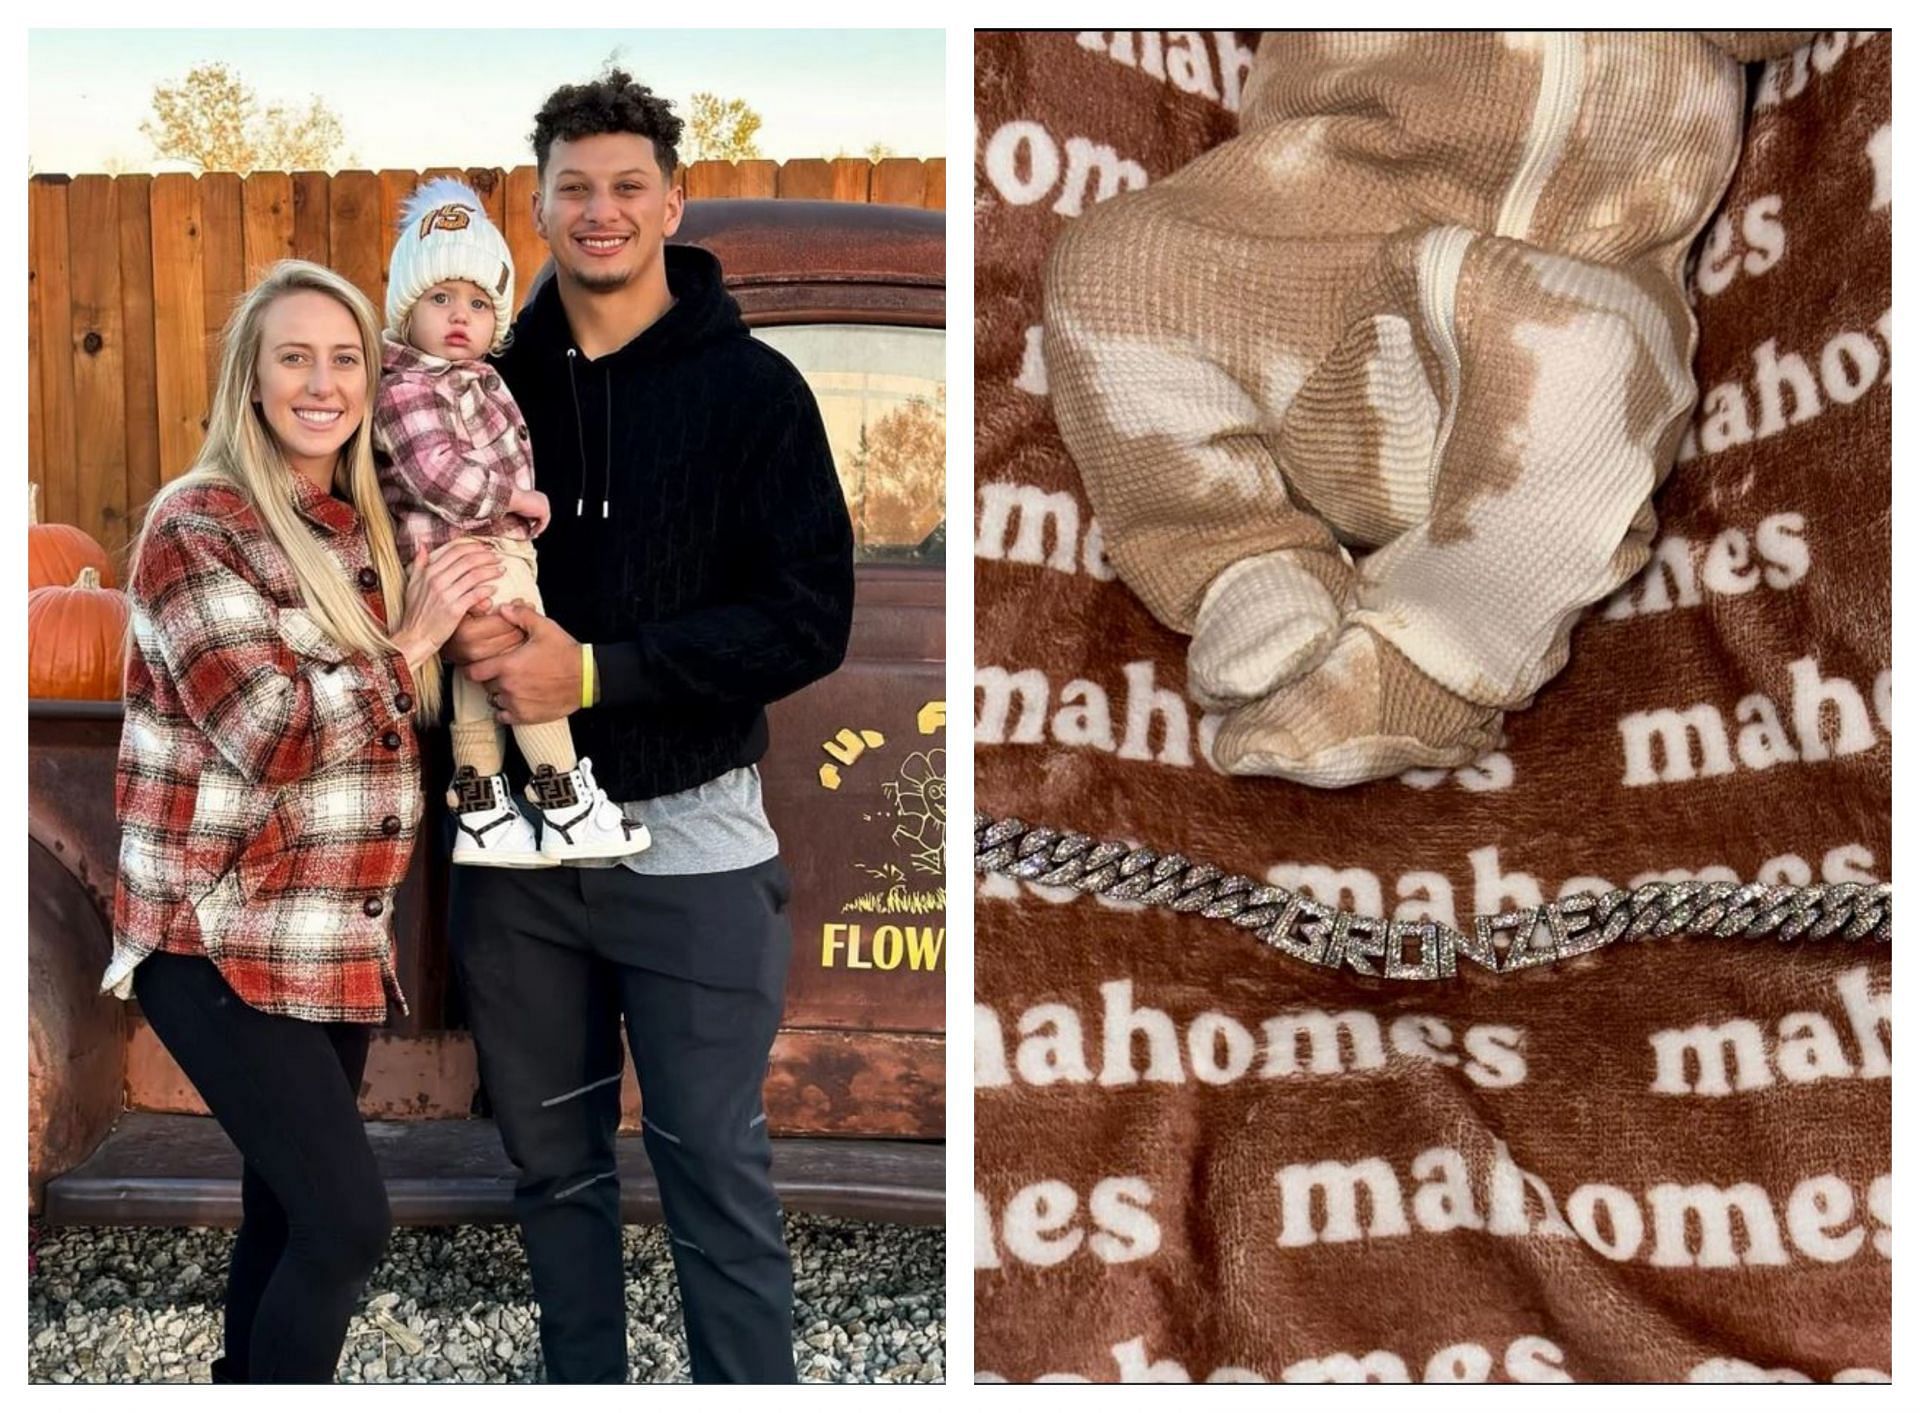 Brittany and Patrick Mahomes' Kids Giggle in Sweet Photos from